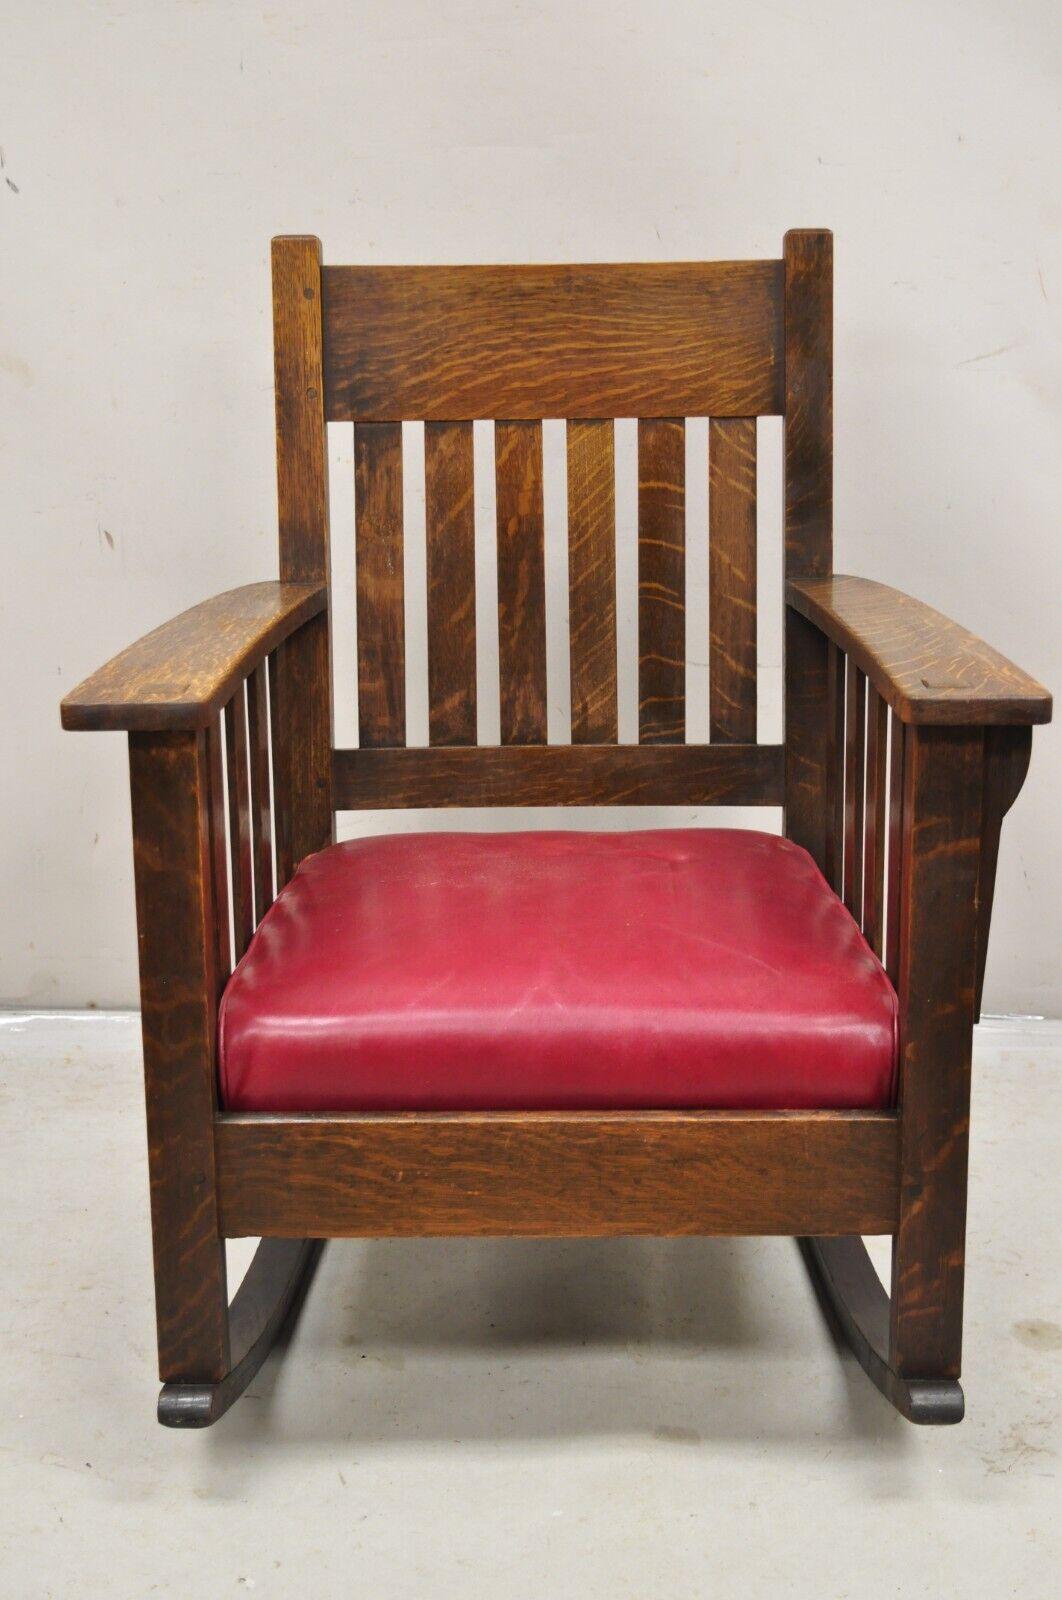 Mission Oak Arts & Crafts Stickley JM Young Style Rocker Rocking Chair Red Seat. Item features mortise and tenon joints, beautiful quartersawn oak wood, original red Naugahyde spring cushion, very nice antique chair. Possibly by Stickley / Quaint